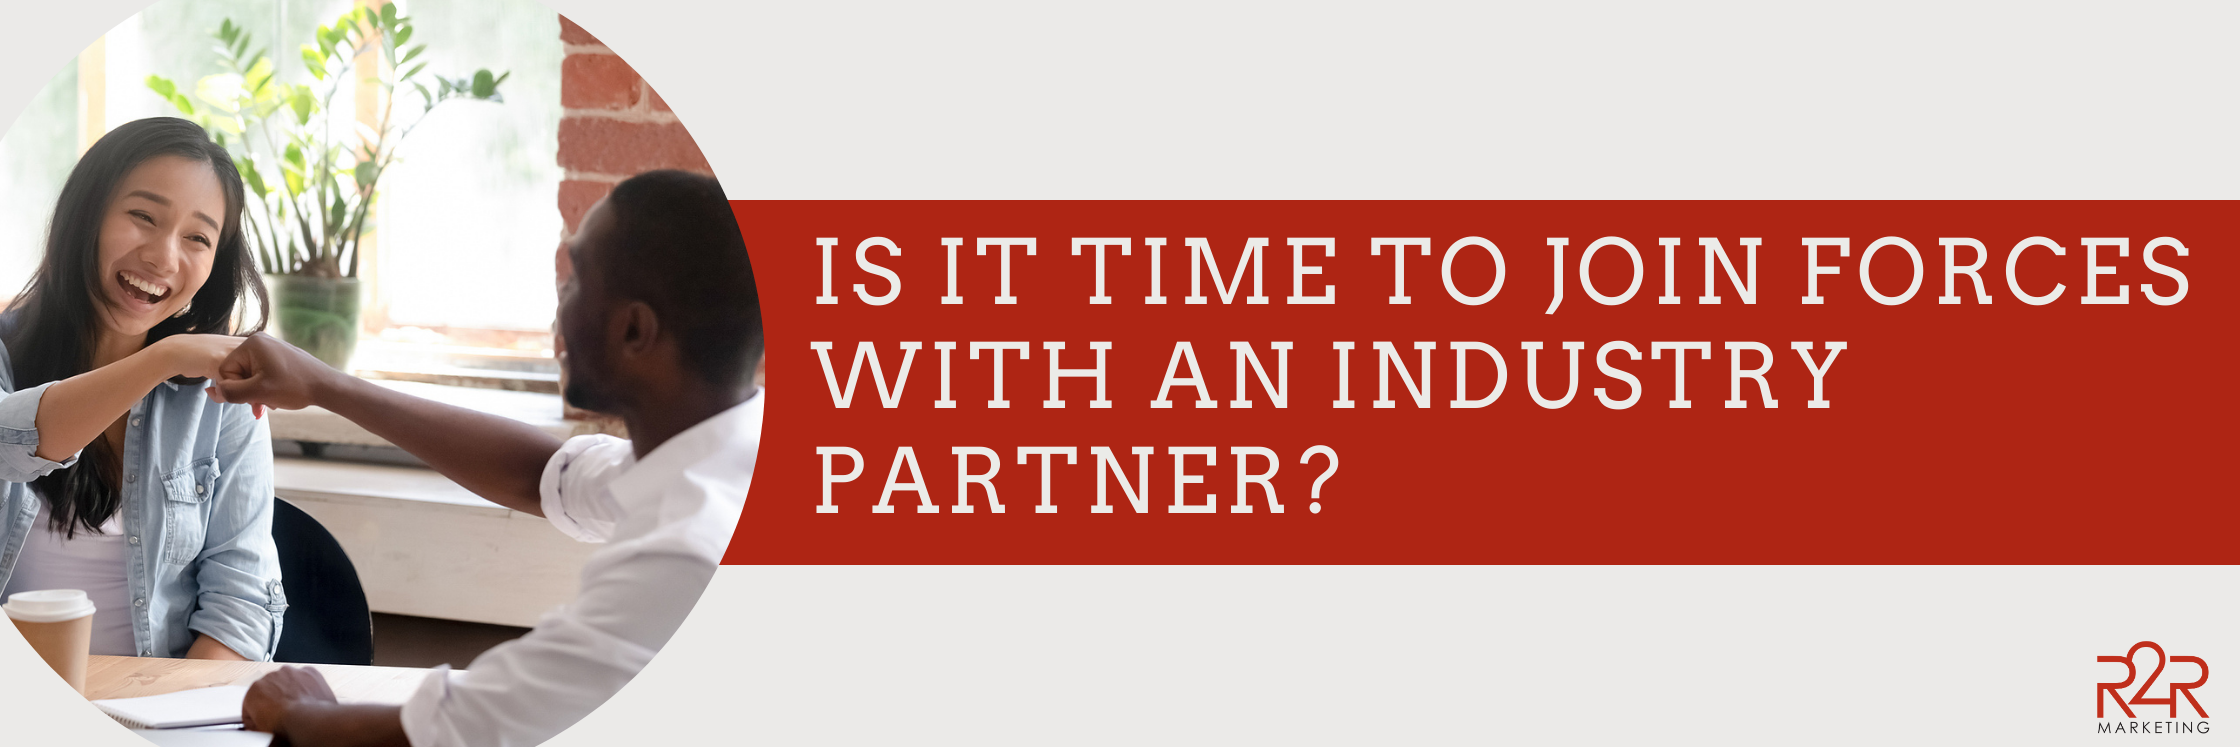 Is It Time to Join Forces with an Industry Partner?